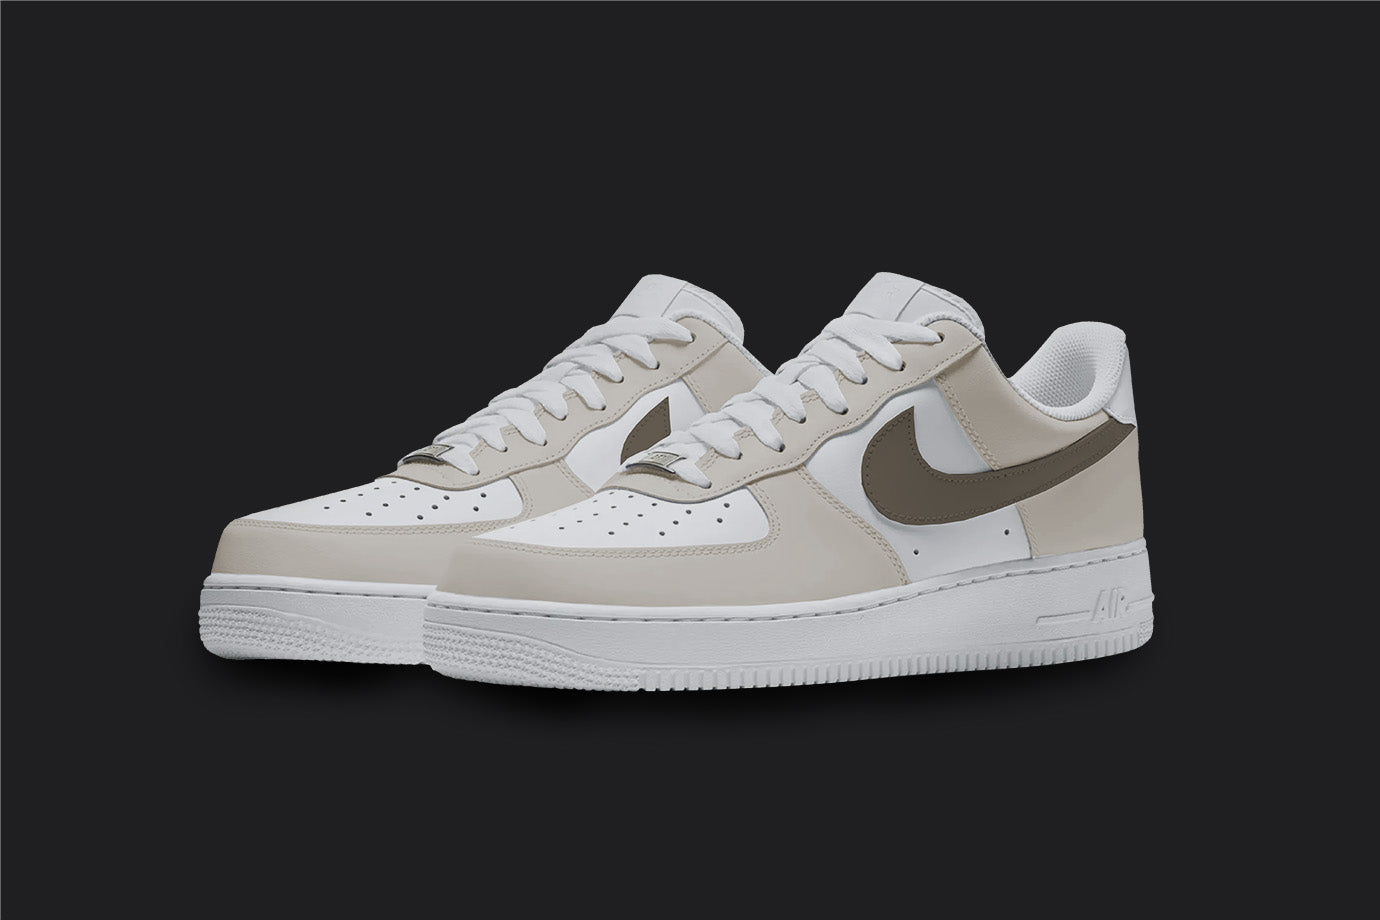 The image is of a Custom Nike Air force 1 sneaker pair on a blank black background. The white custom sneakers have a light brown colorway covering the sneakers. 